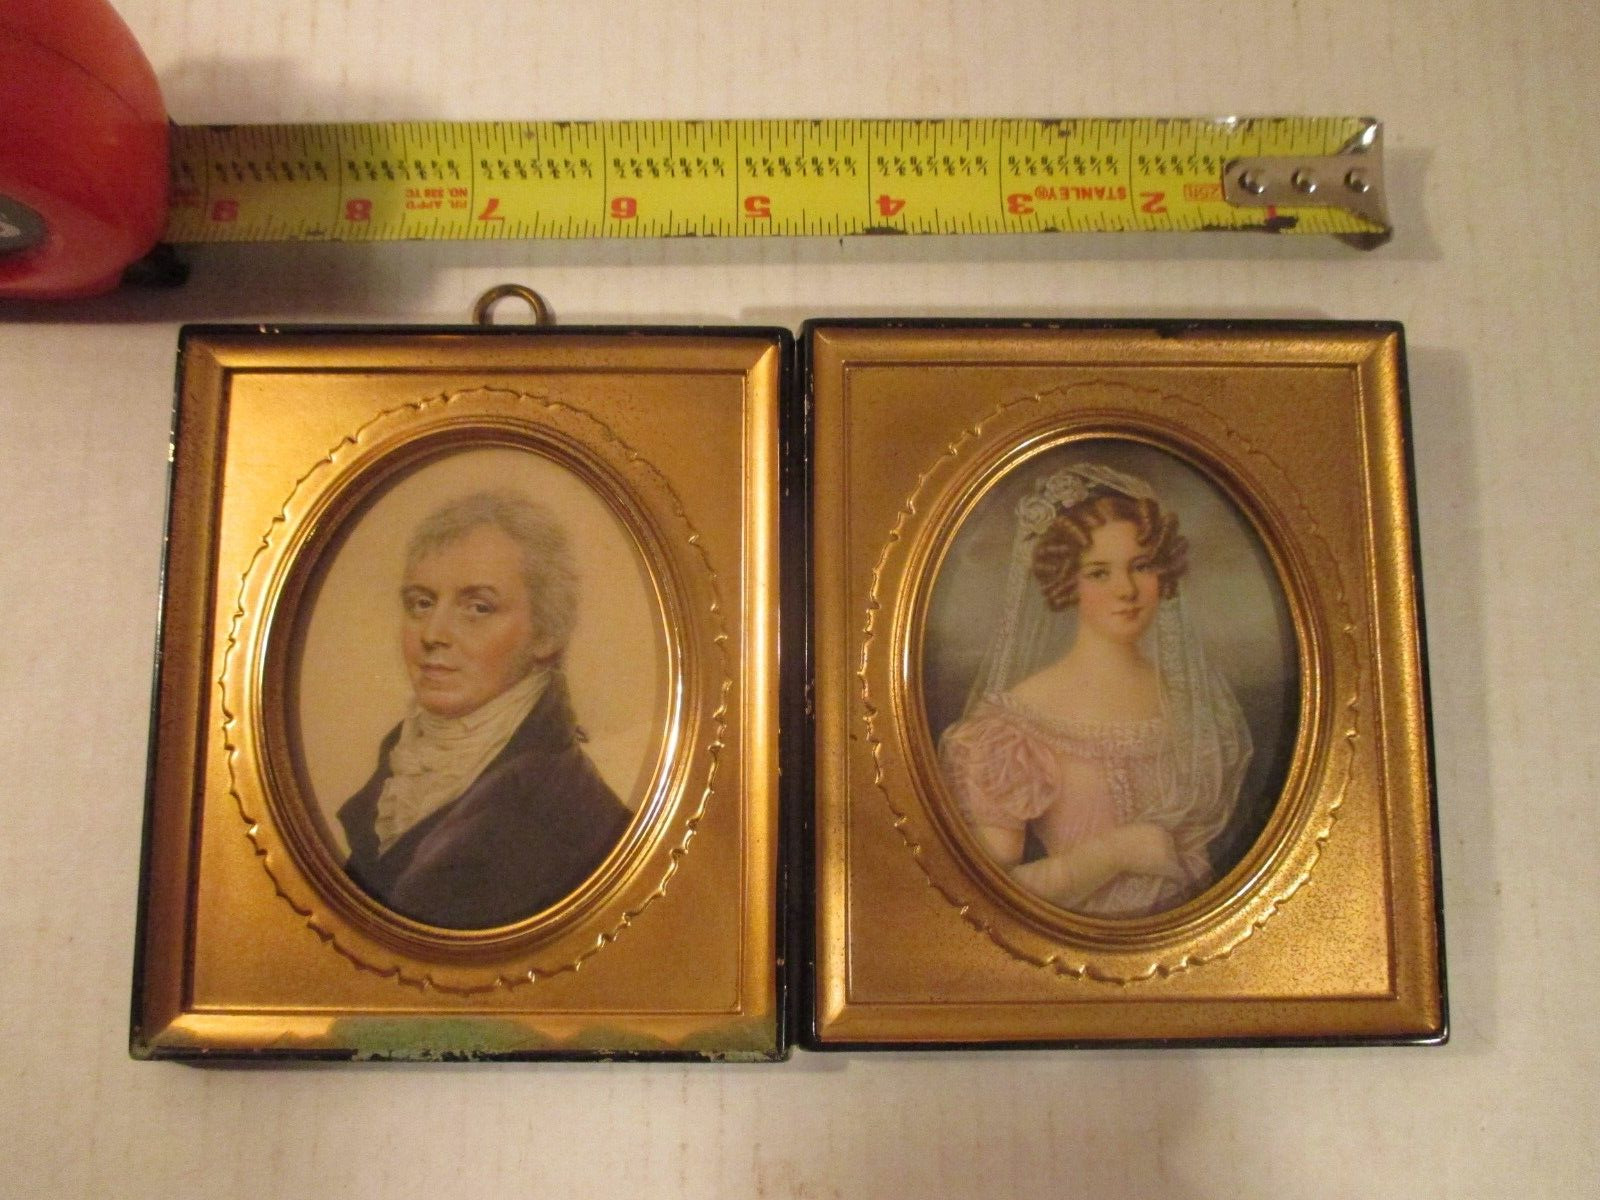 MR JAMES FITLER and unknown women  by JAMES SMART  miniatures  in brass frames .